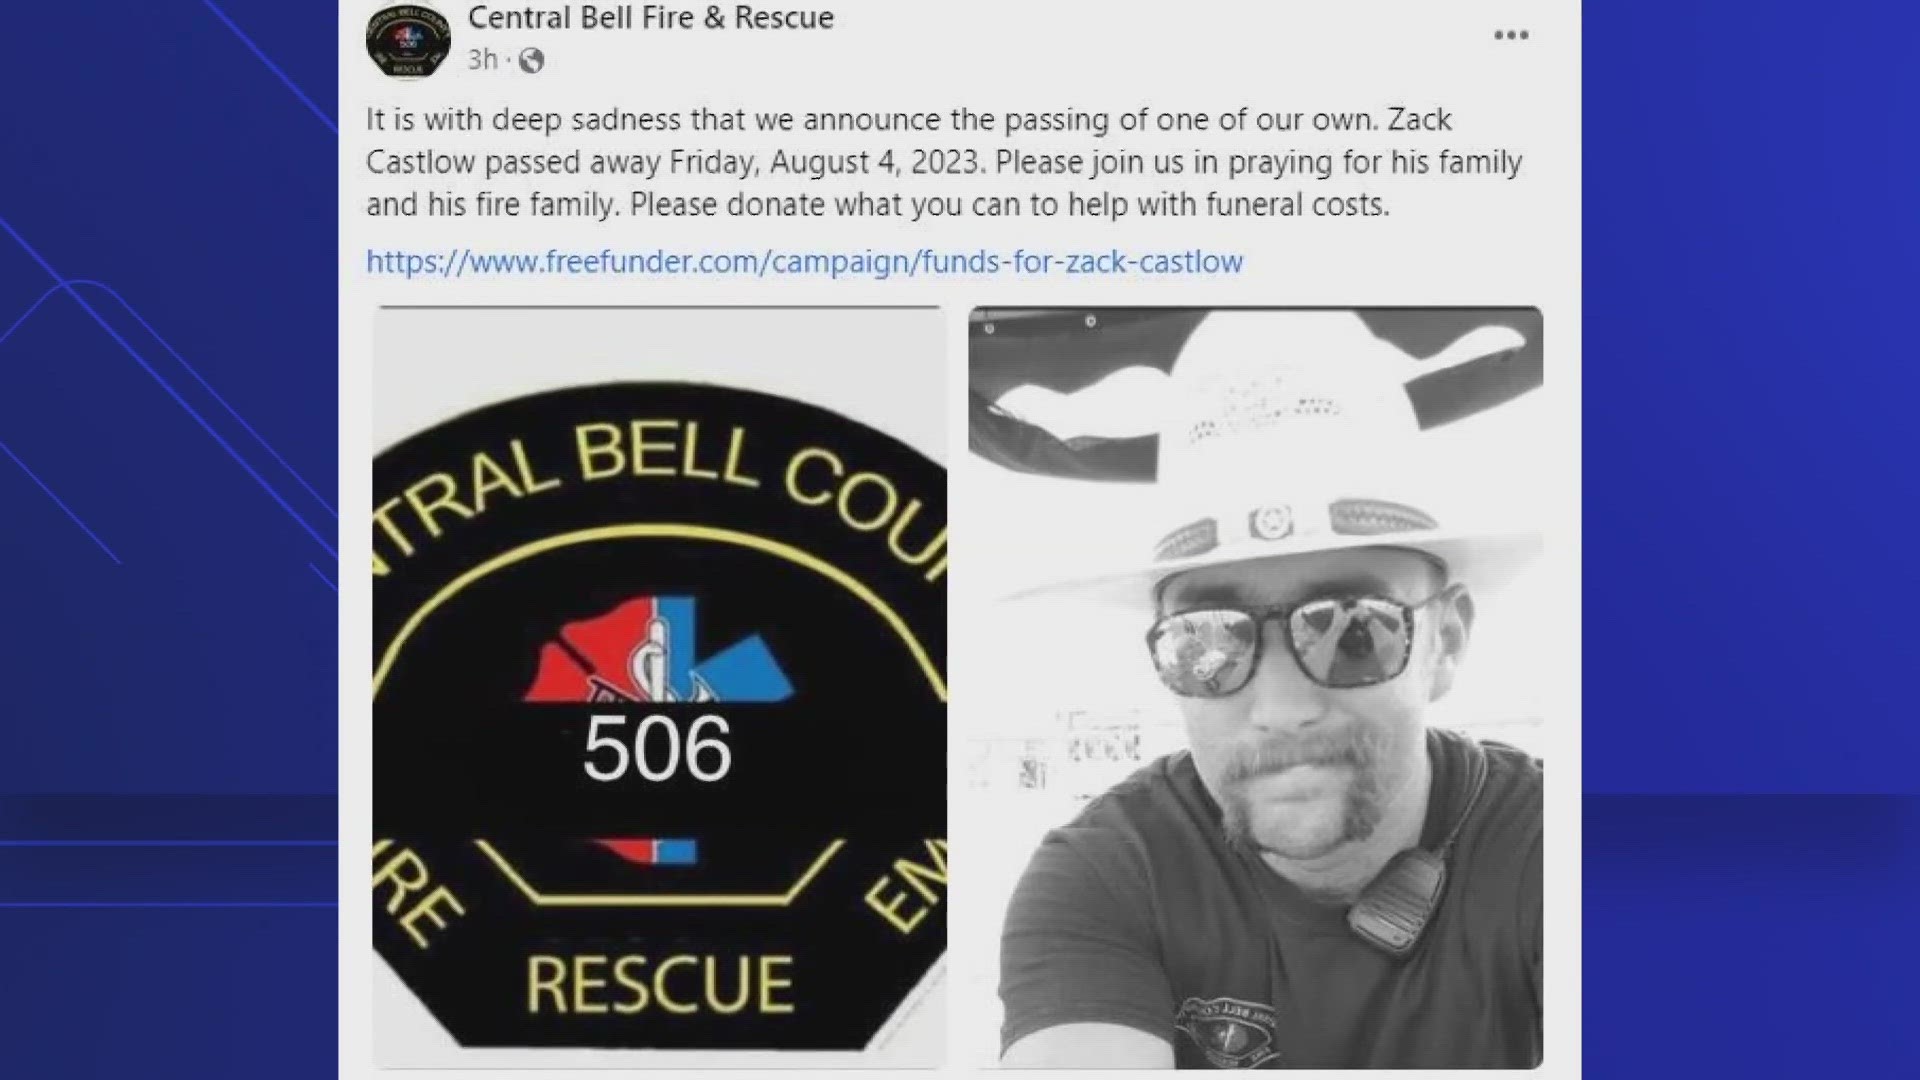 Zack Castlow died on Friday, Aug. 4. Fire and Rescue is now raising money to help pay for his funeral costs.